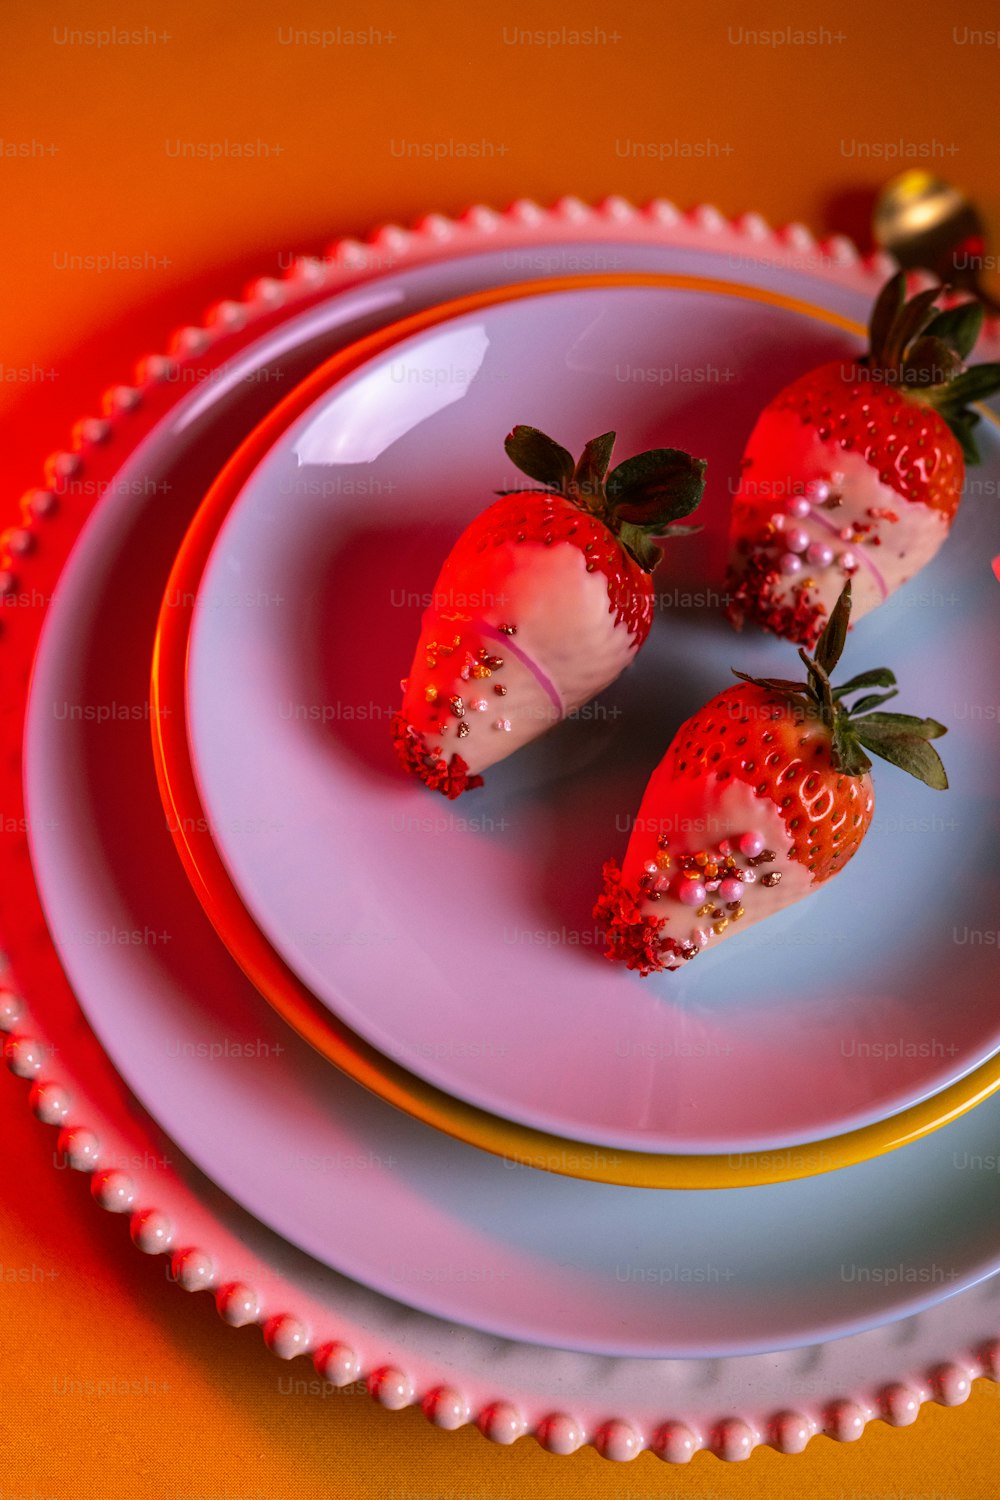 a plate with three strawberries on it